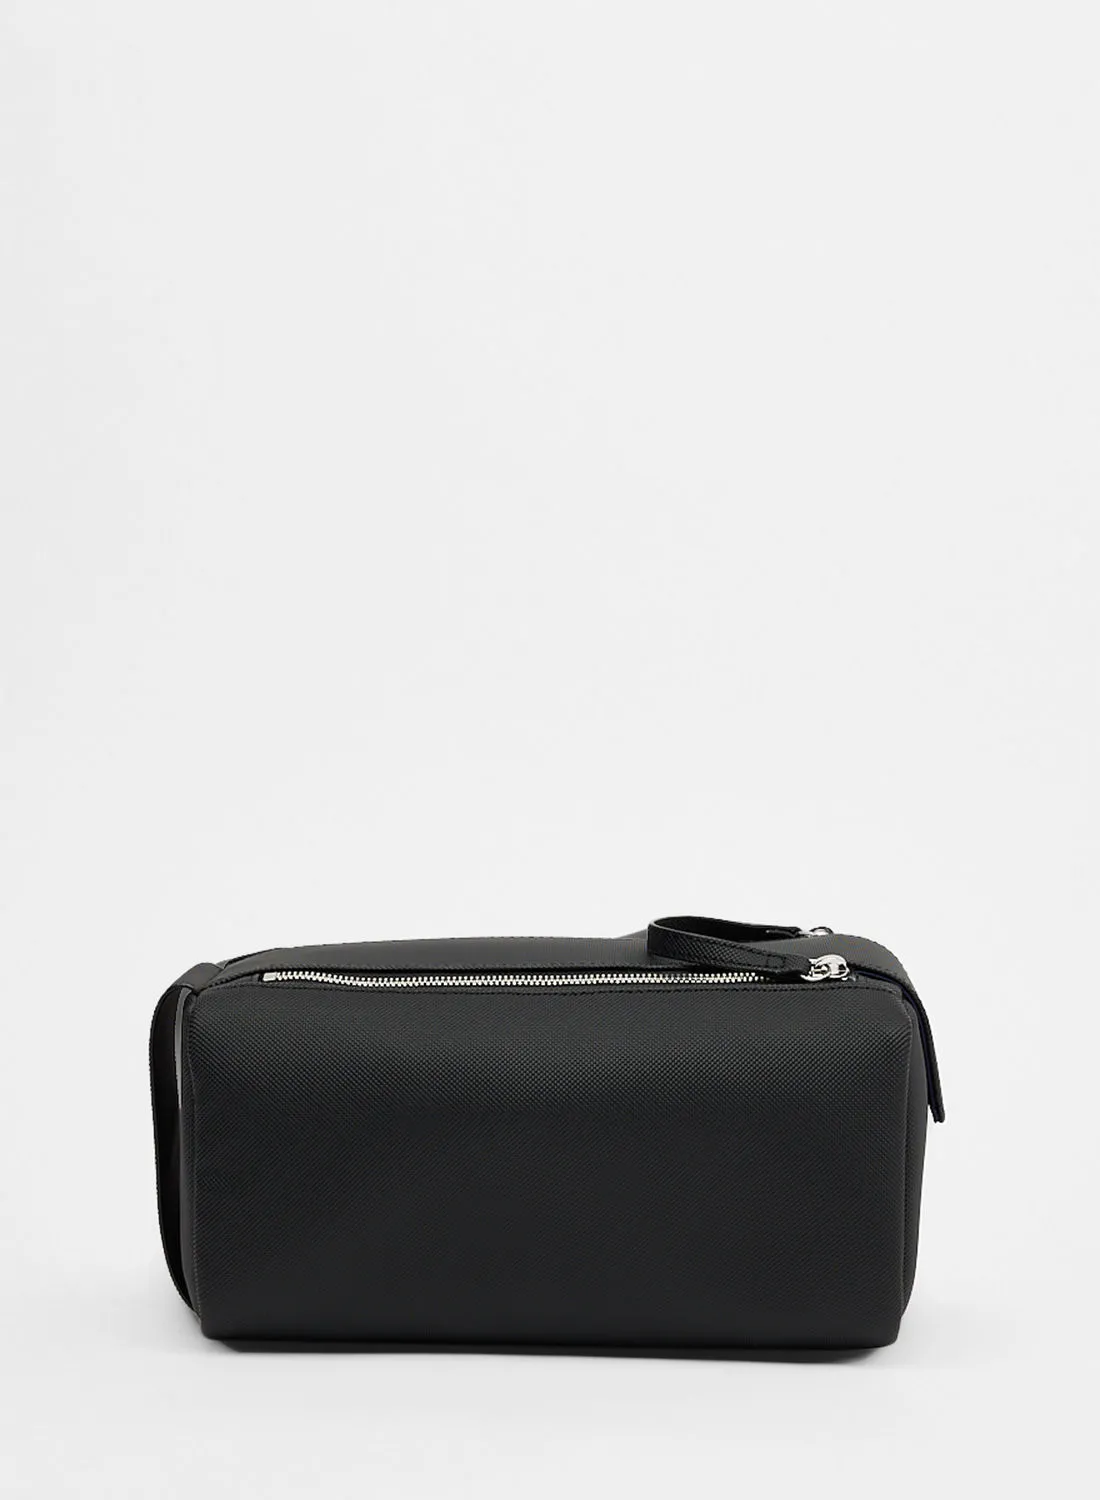 LACOSTE Classic Toiletry Bag Black